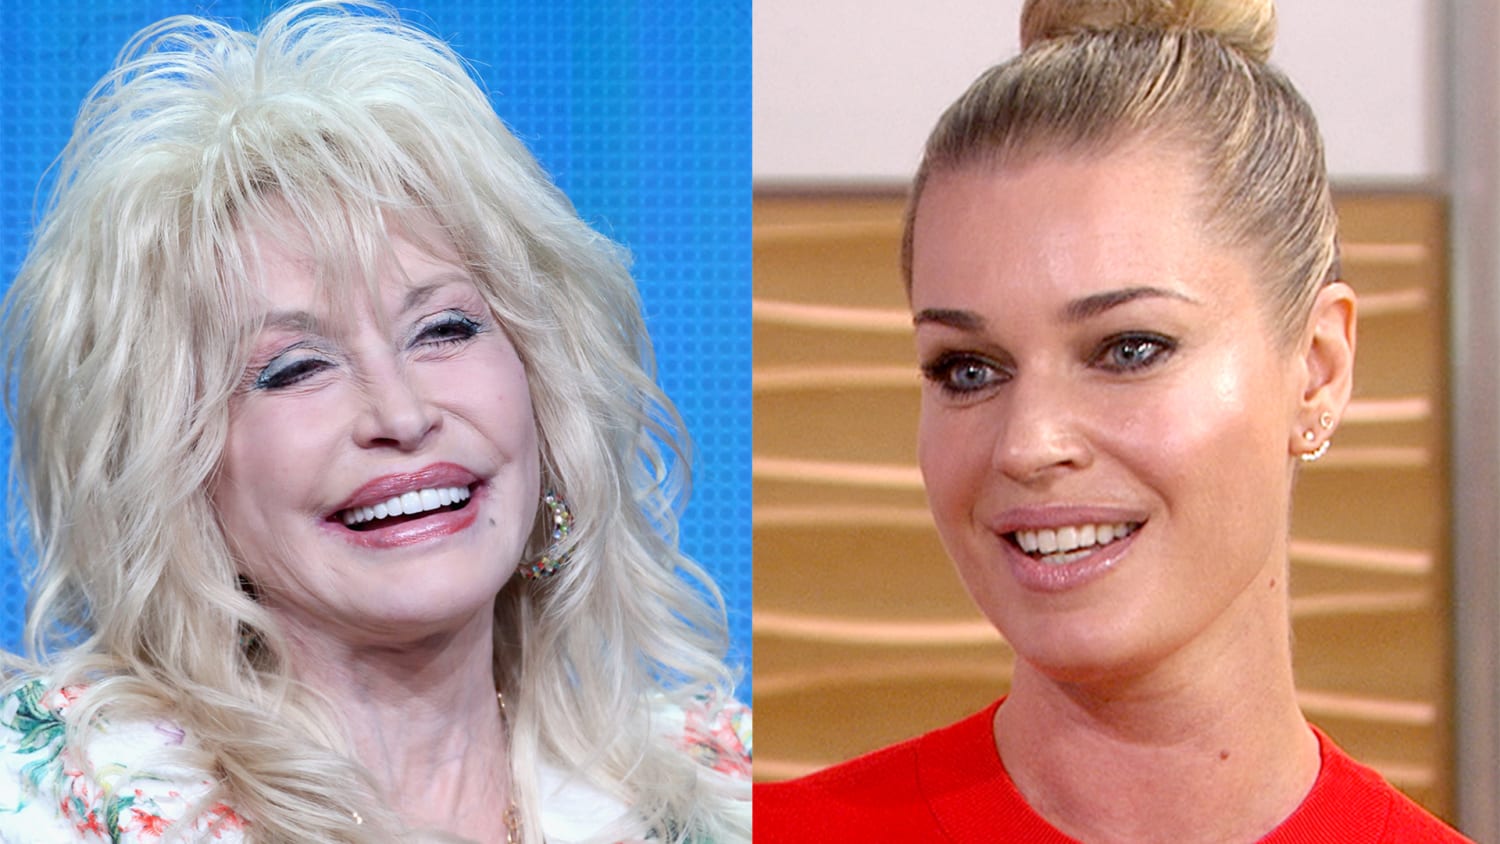 Rebecca Romijn named daughter after Dolly Parton, and singer had sweet response ...1920 x 1080